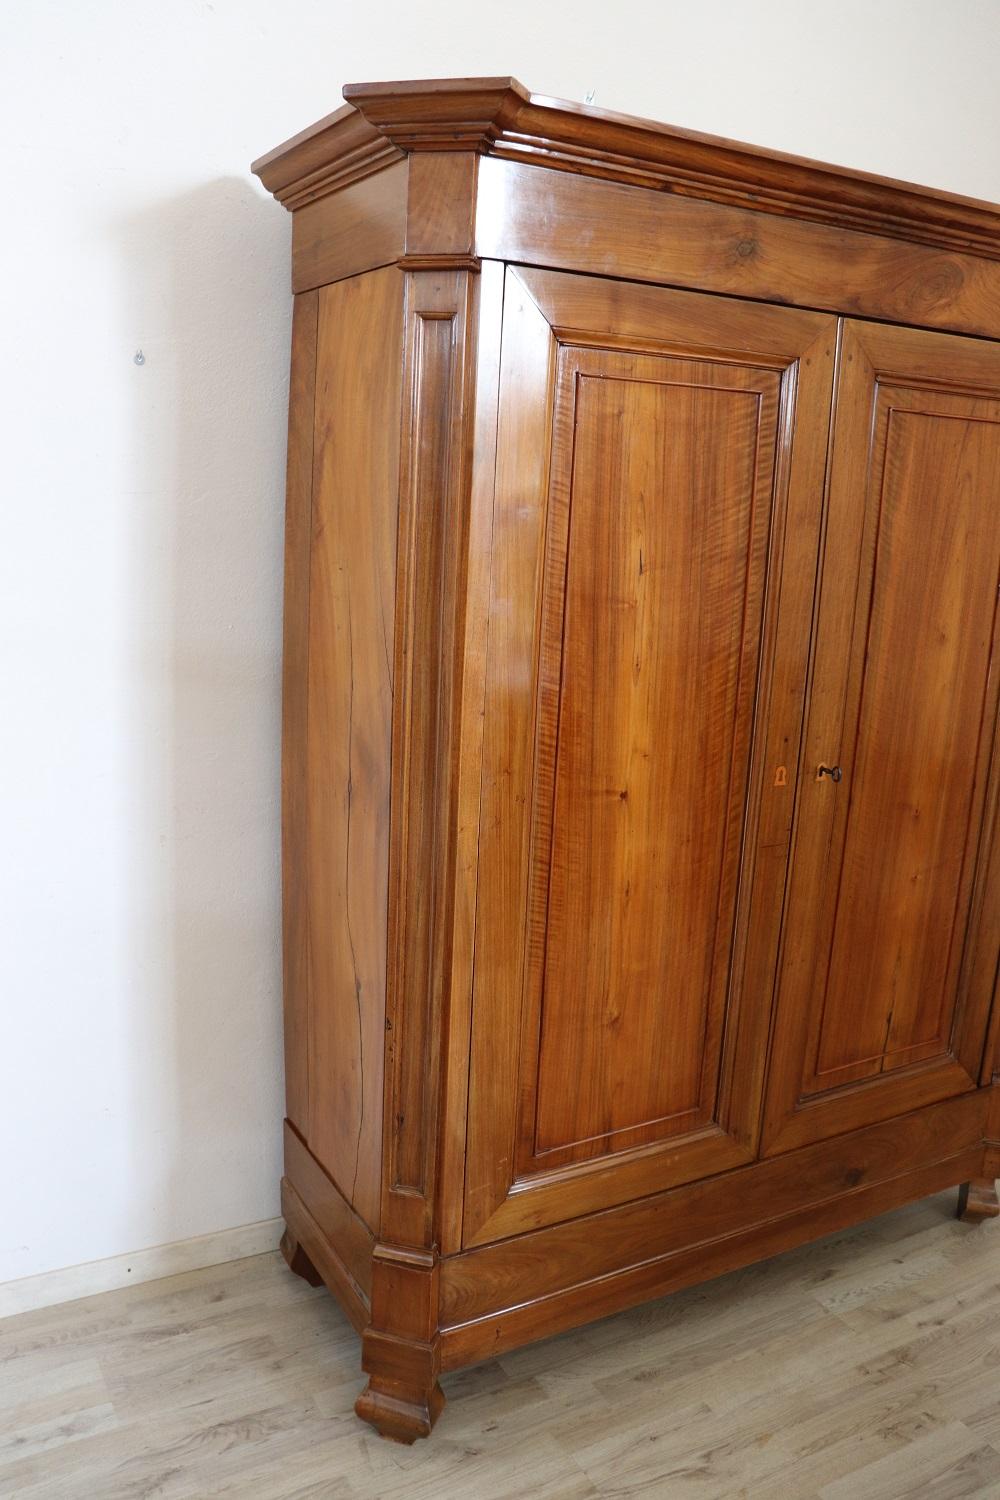 Rare and important antique wardrobe in solid walnut wood made in 1850s. Internally there are many shelves but if you want you can change with a stick to hang clothes. Very linear, perfect also to be placed in modern houses. This spectacular wardrobe